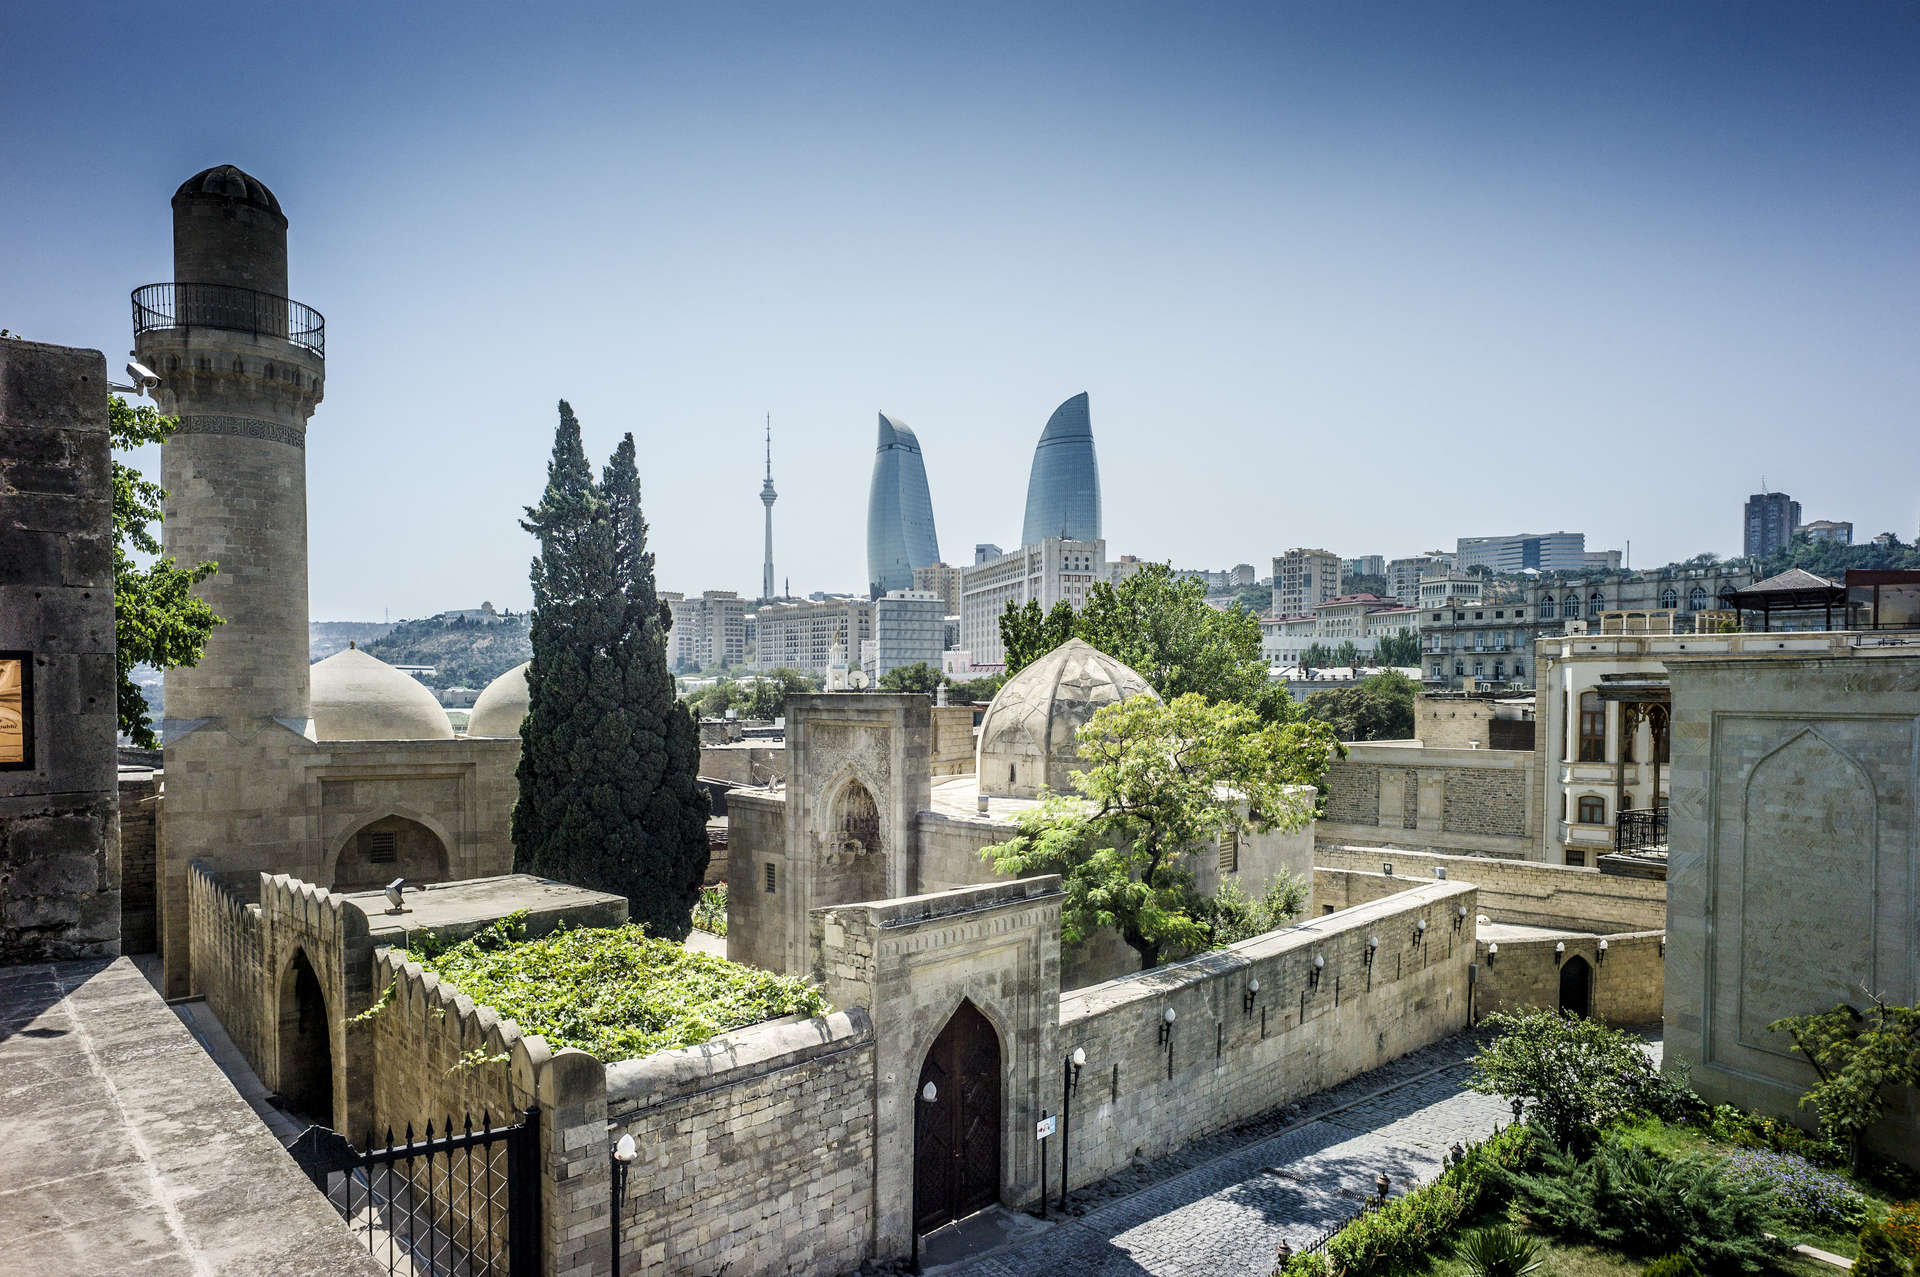 View of the Old Town in the heart of Baku